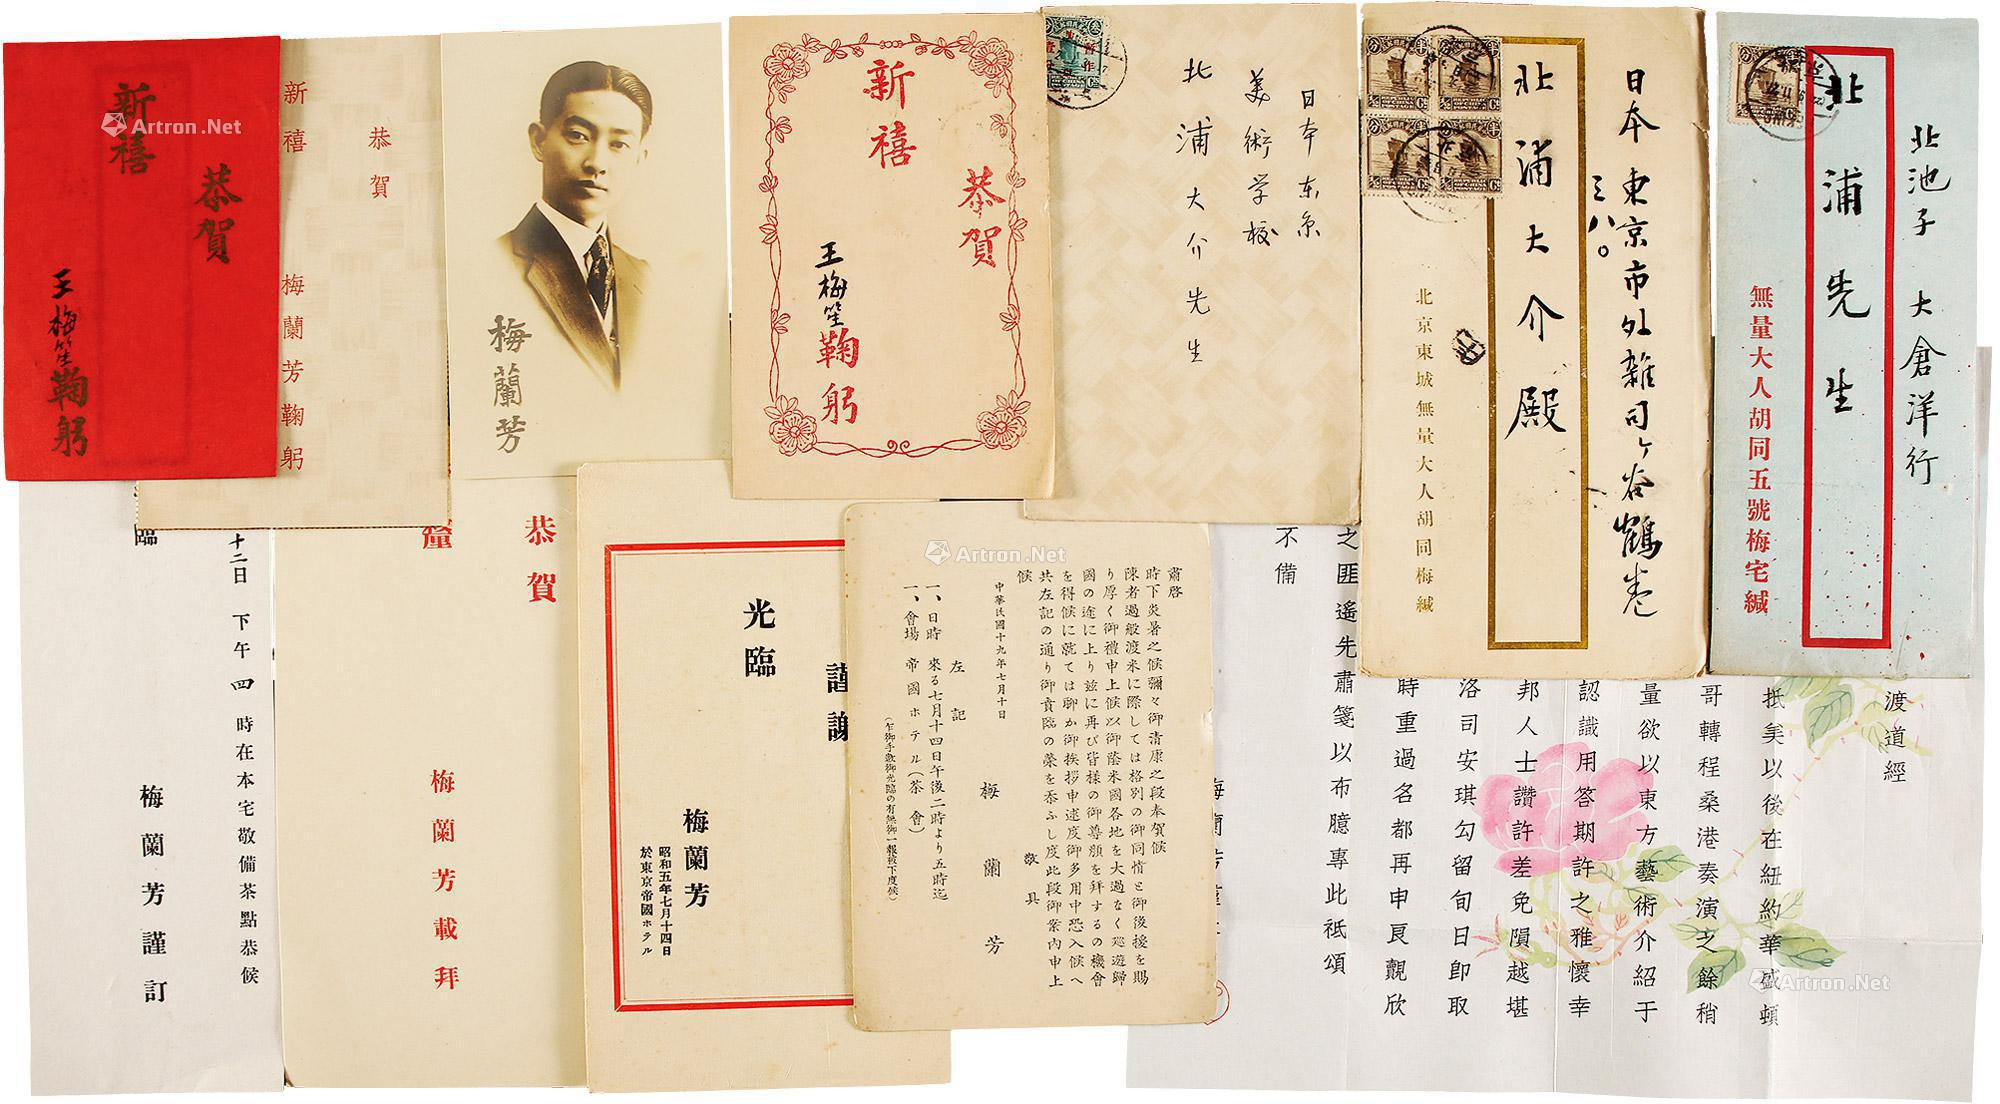 Group of seven pages photo and greeting card invitation of Mei Lanfang and Wang Meisheng， with original covers